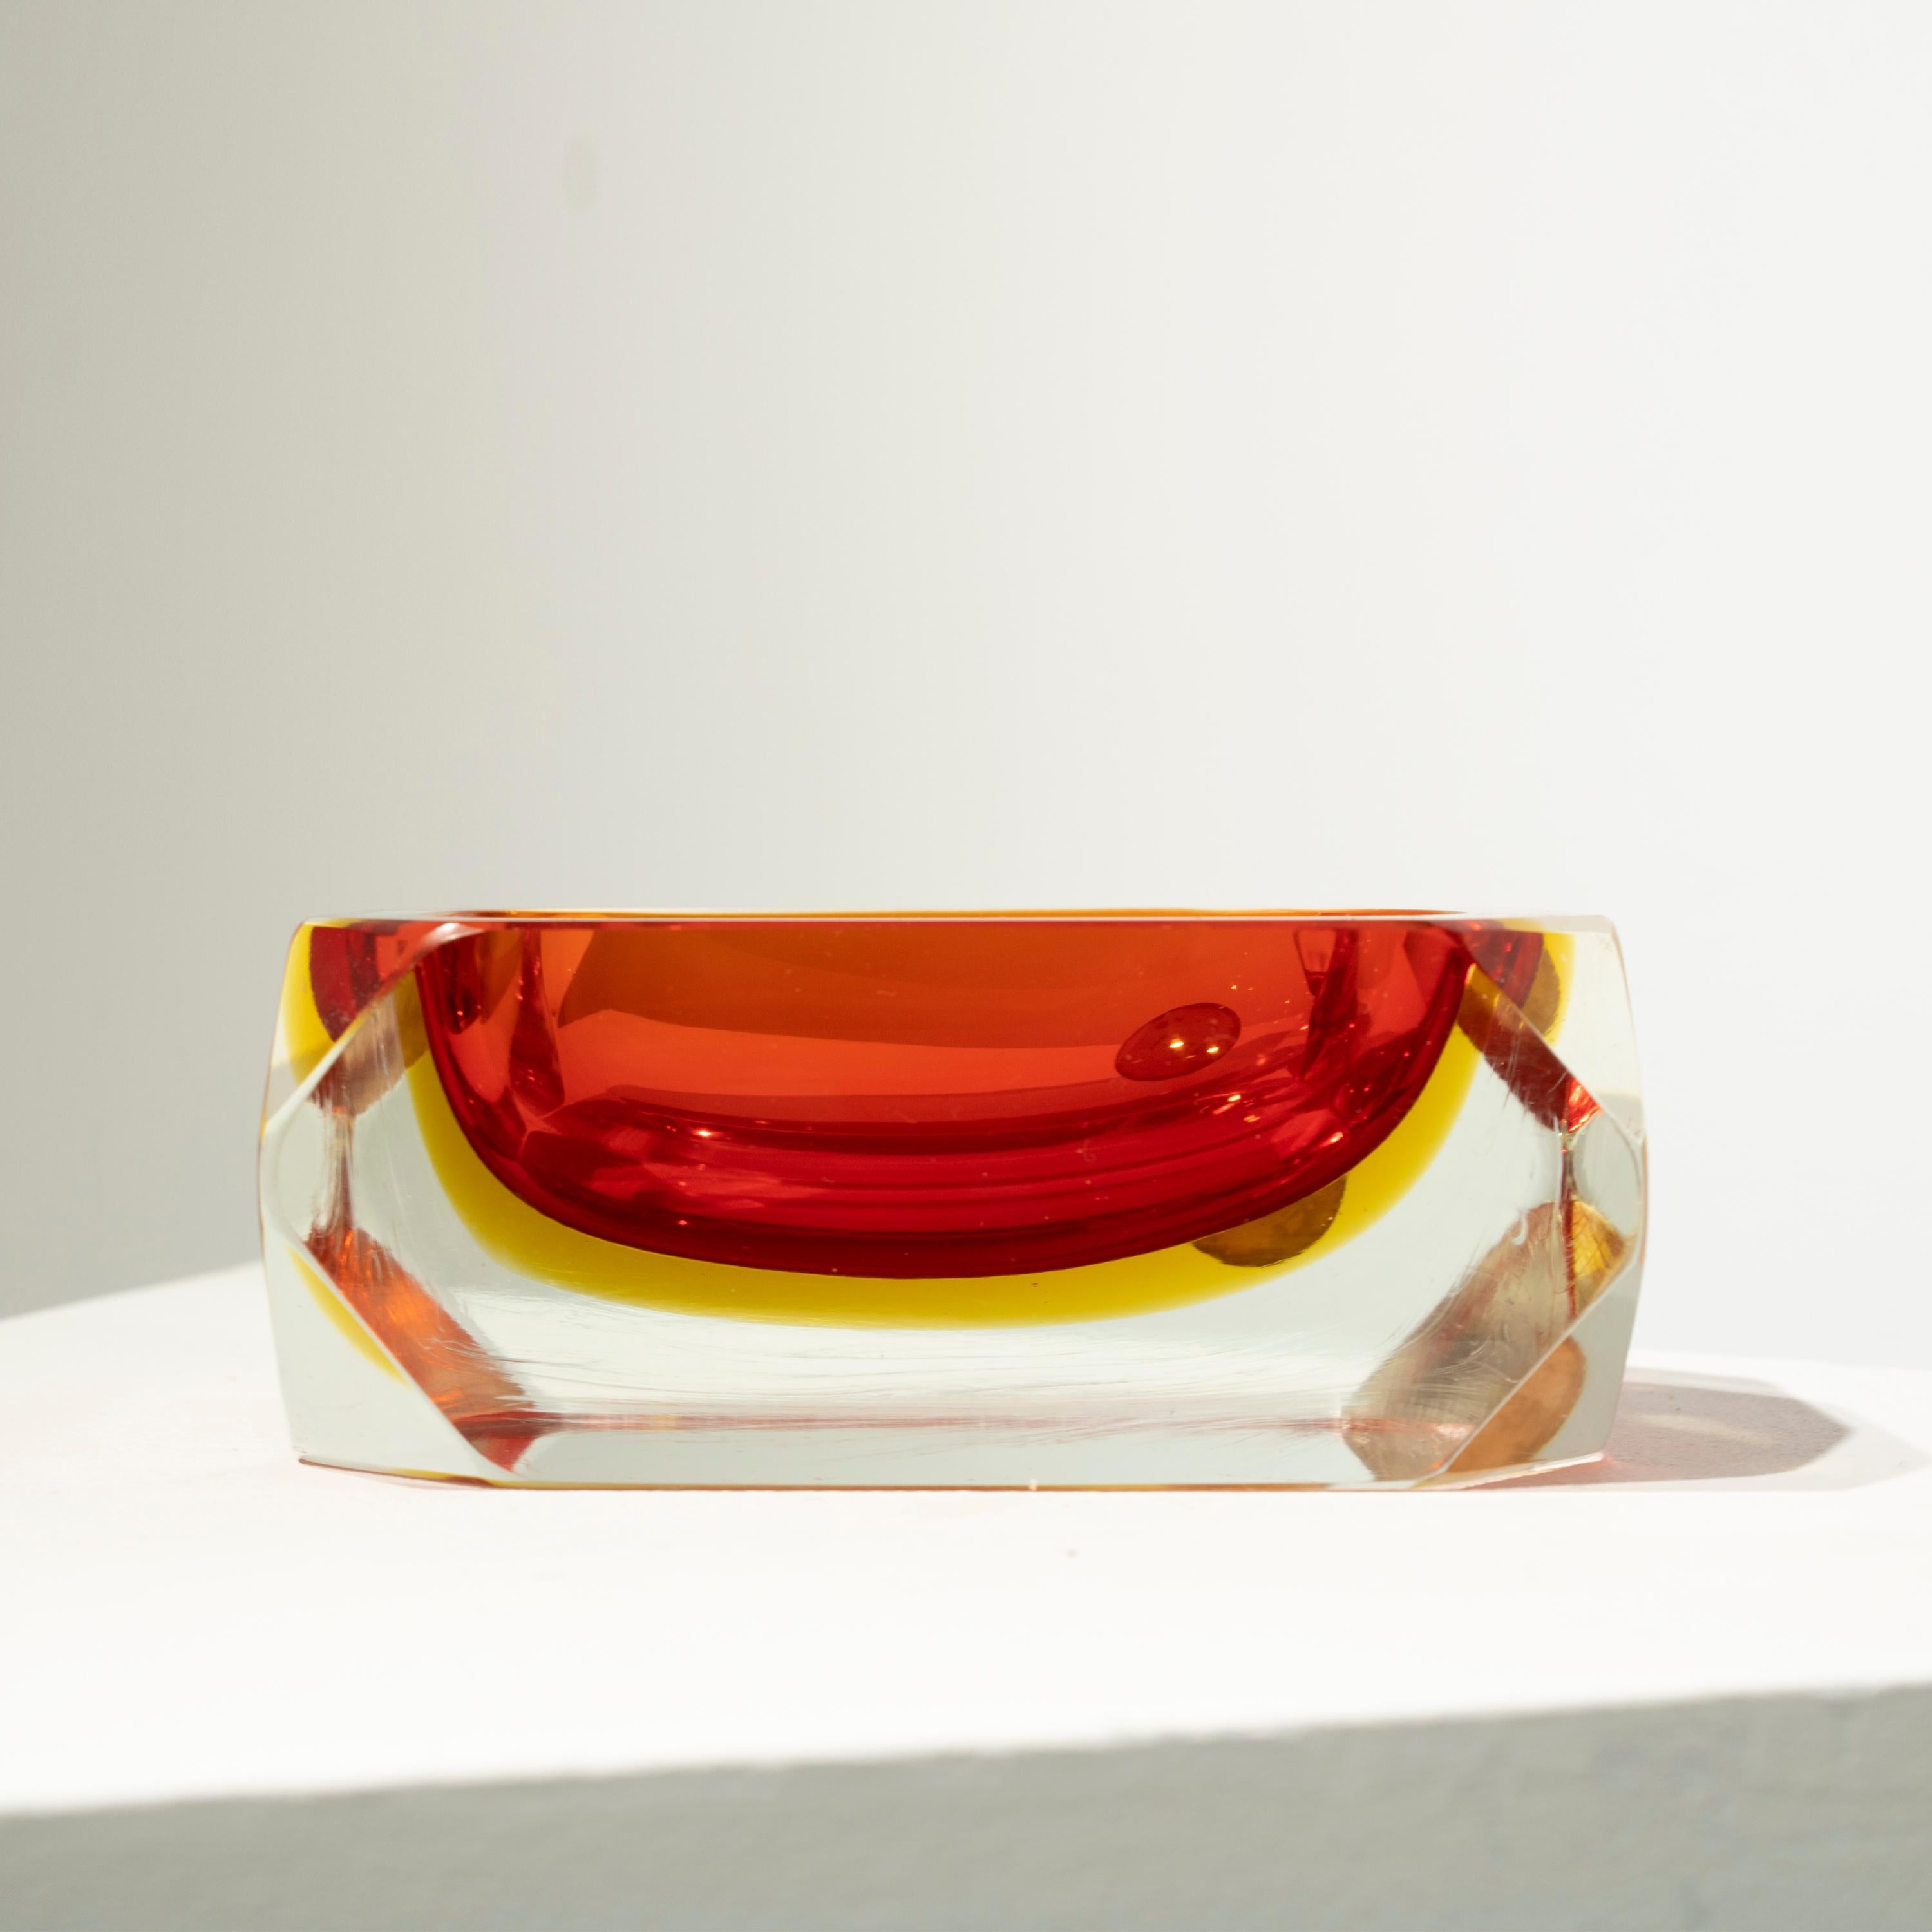 Italian small vase designed by Flavio Poli in the 1970´s. The vase is hand-crafted in faceted Murano glass with a rectangular shape, in different colors with predominant red.